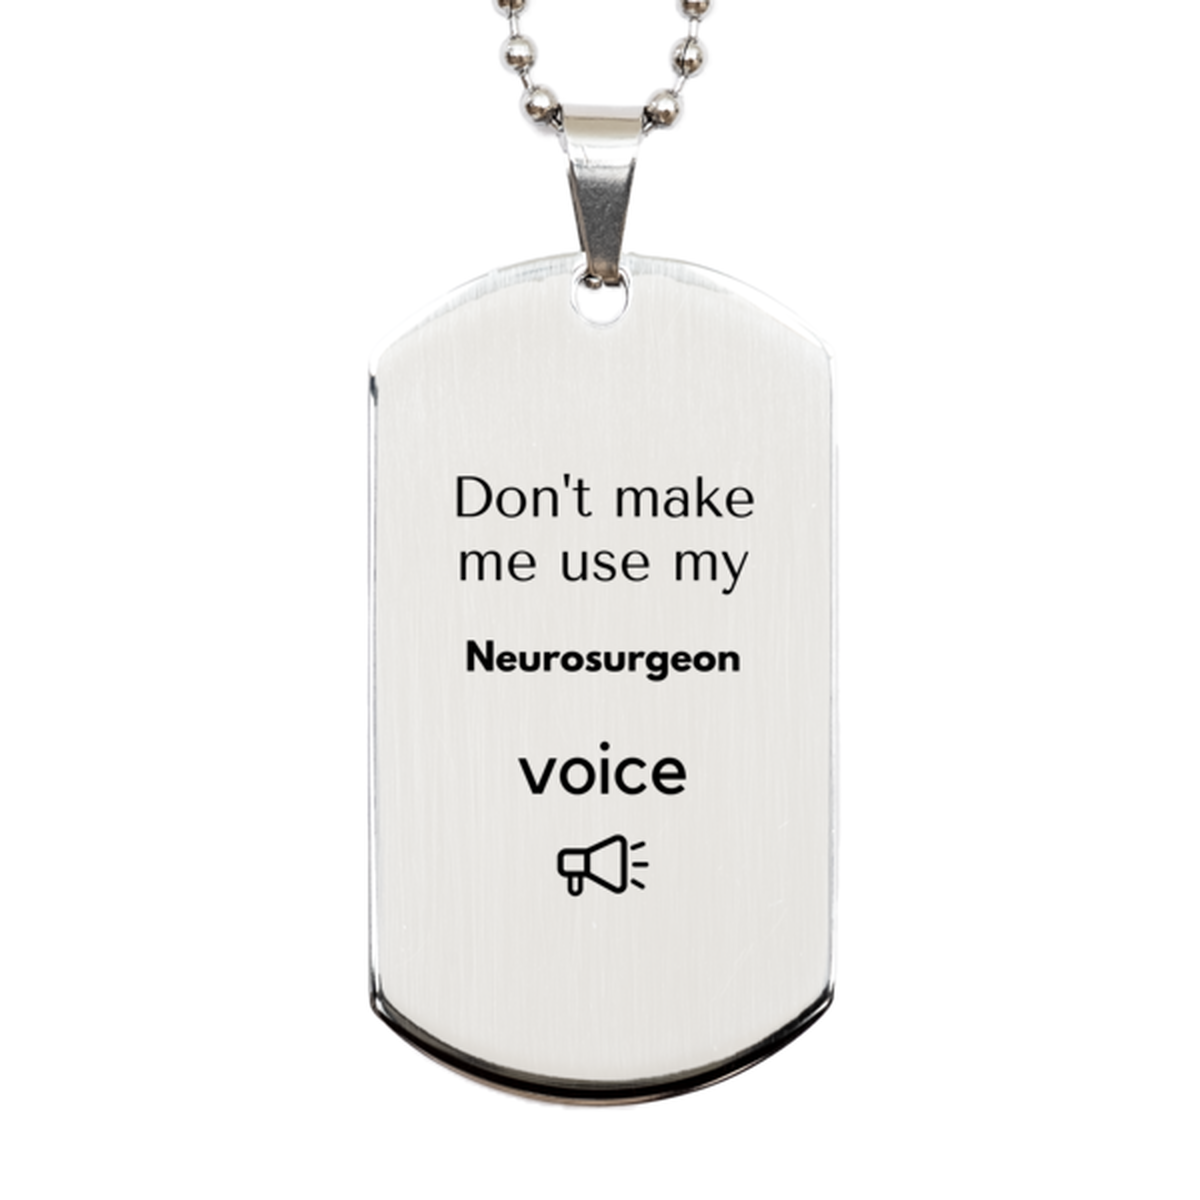 Don't make me use my Neurosurgeon voice, Sarcasm Neurosurgeon Gifts, Christmas Neurosurgeon Silver Dog Tag Birthday Unique Gifts For Neurosurgeon Coworkers, Men, Women, Colleague, Friends